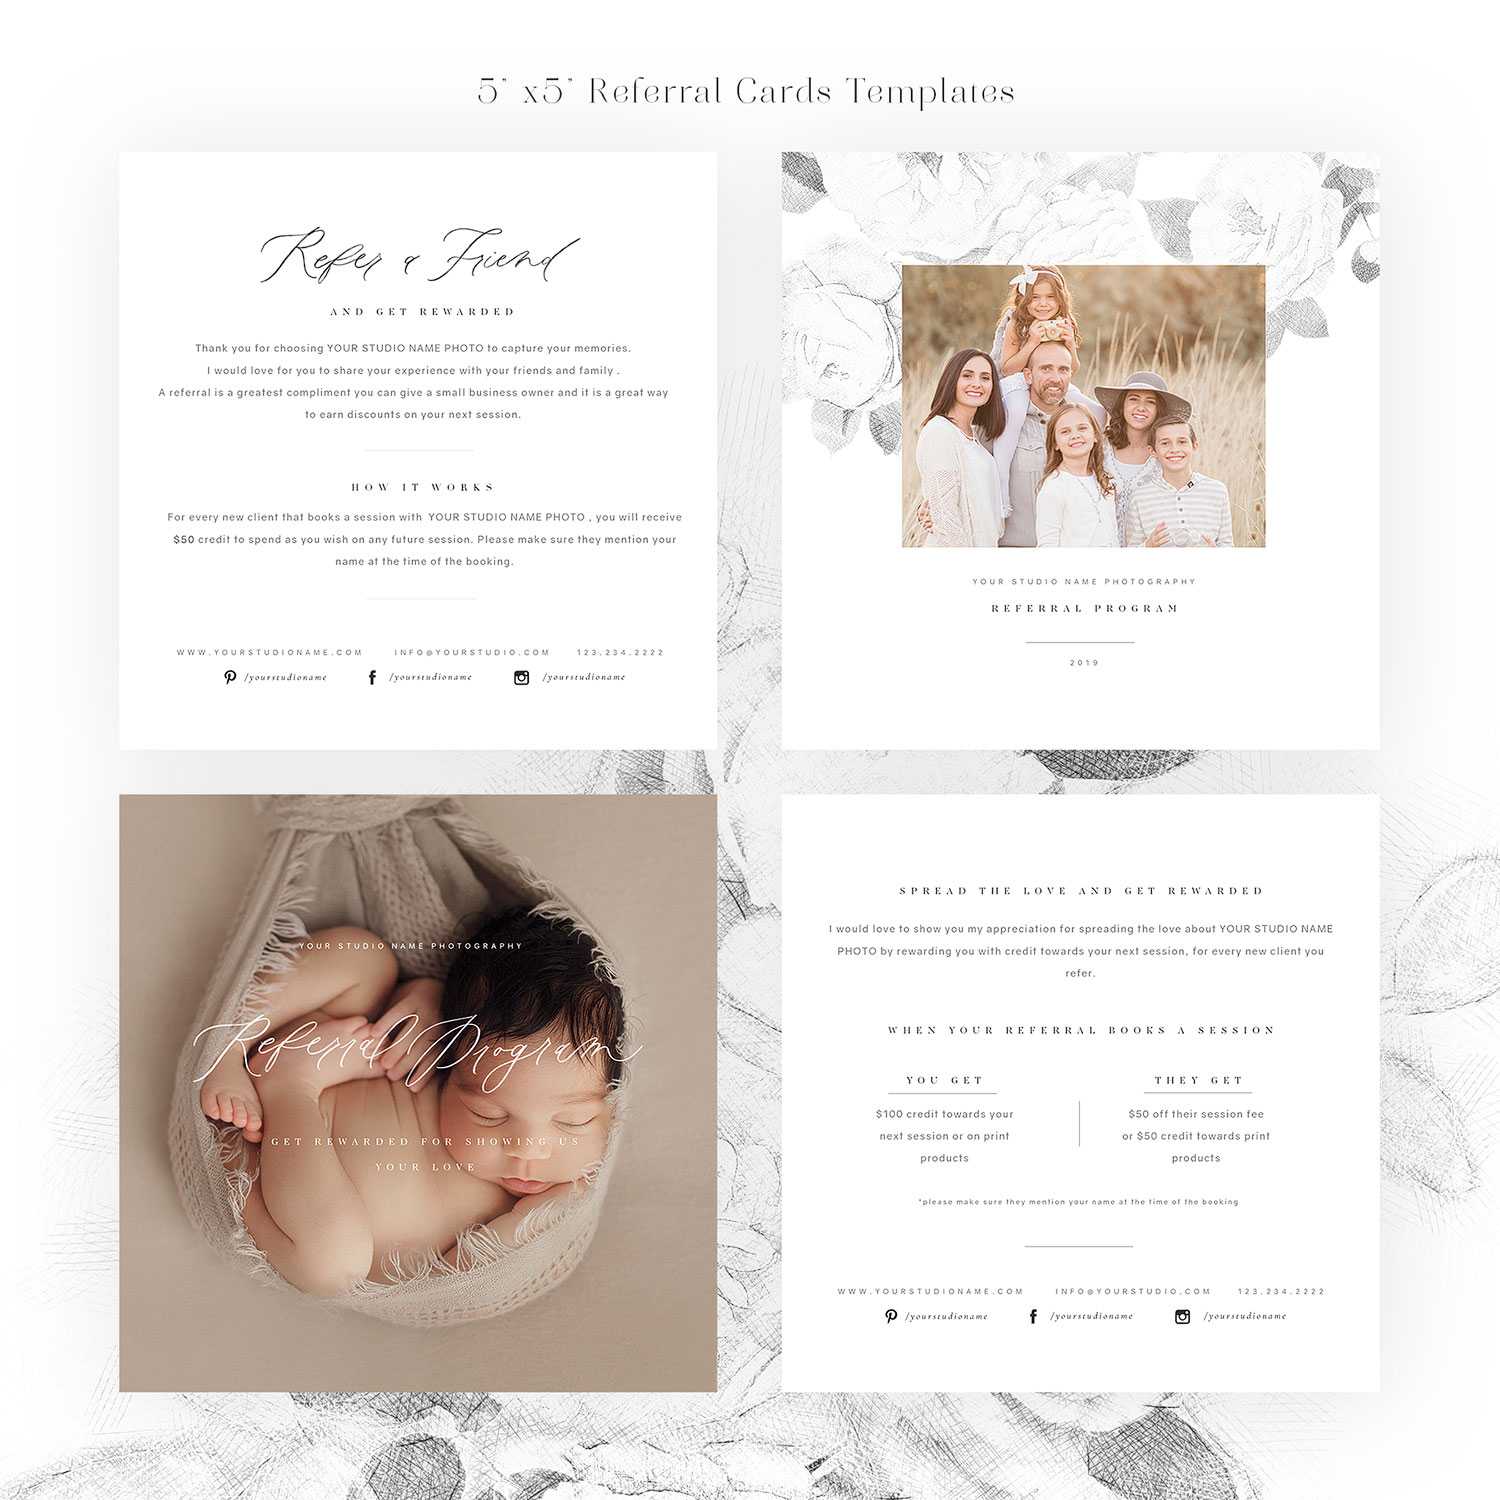 Referral Love 5×5 Card Templates Inside Photography Referral Card Templates